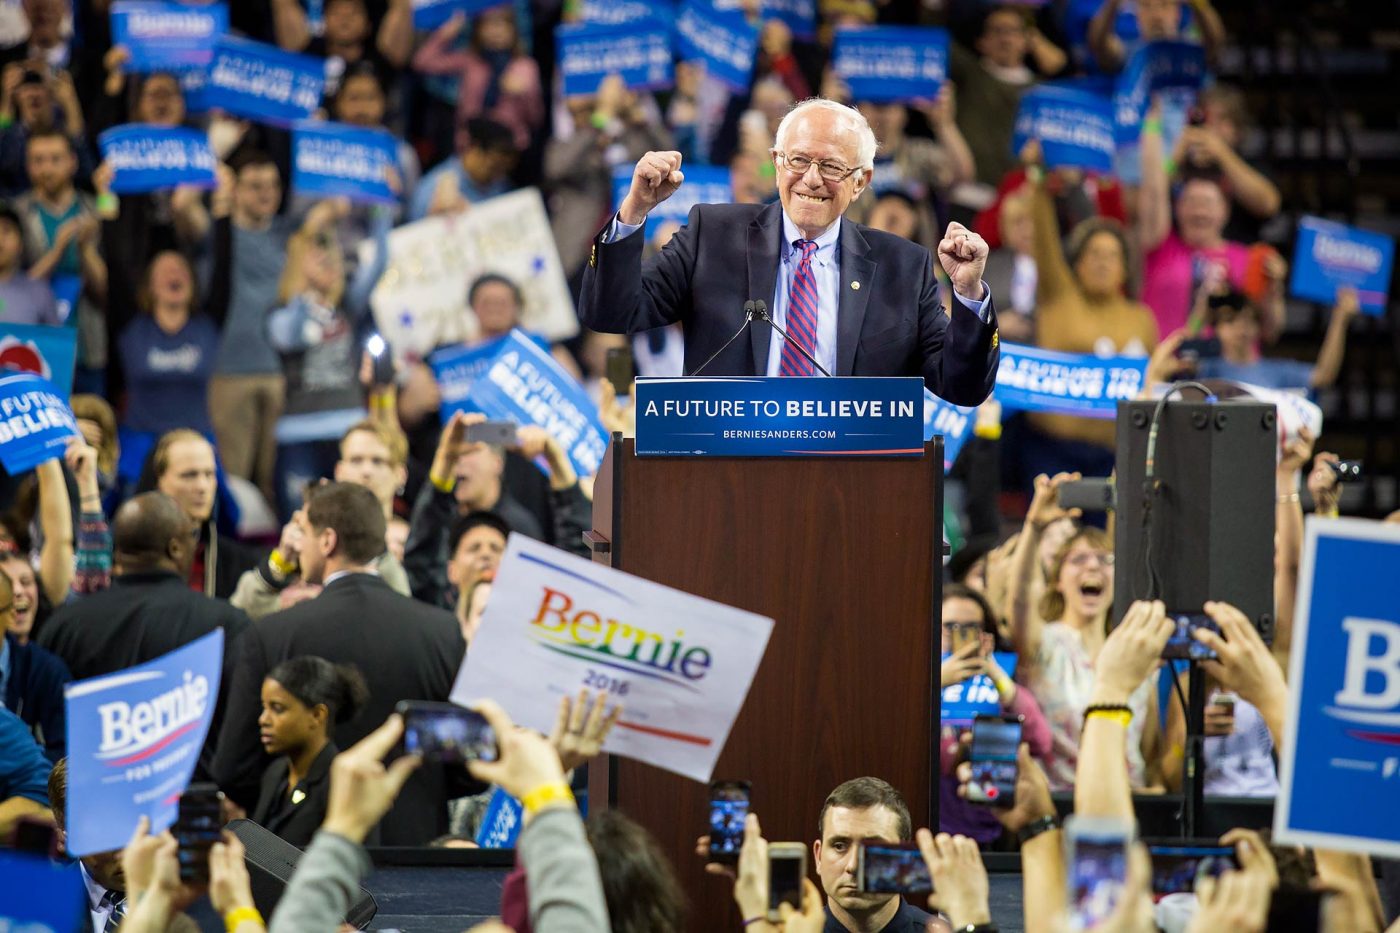 Bernie Sanders at his rally on March 20 at Key Arena in Seattle.